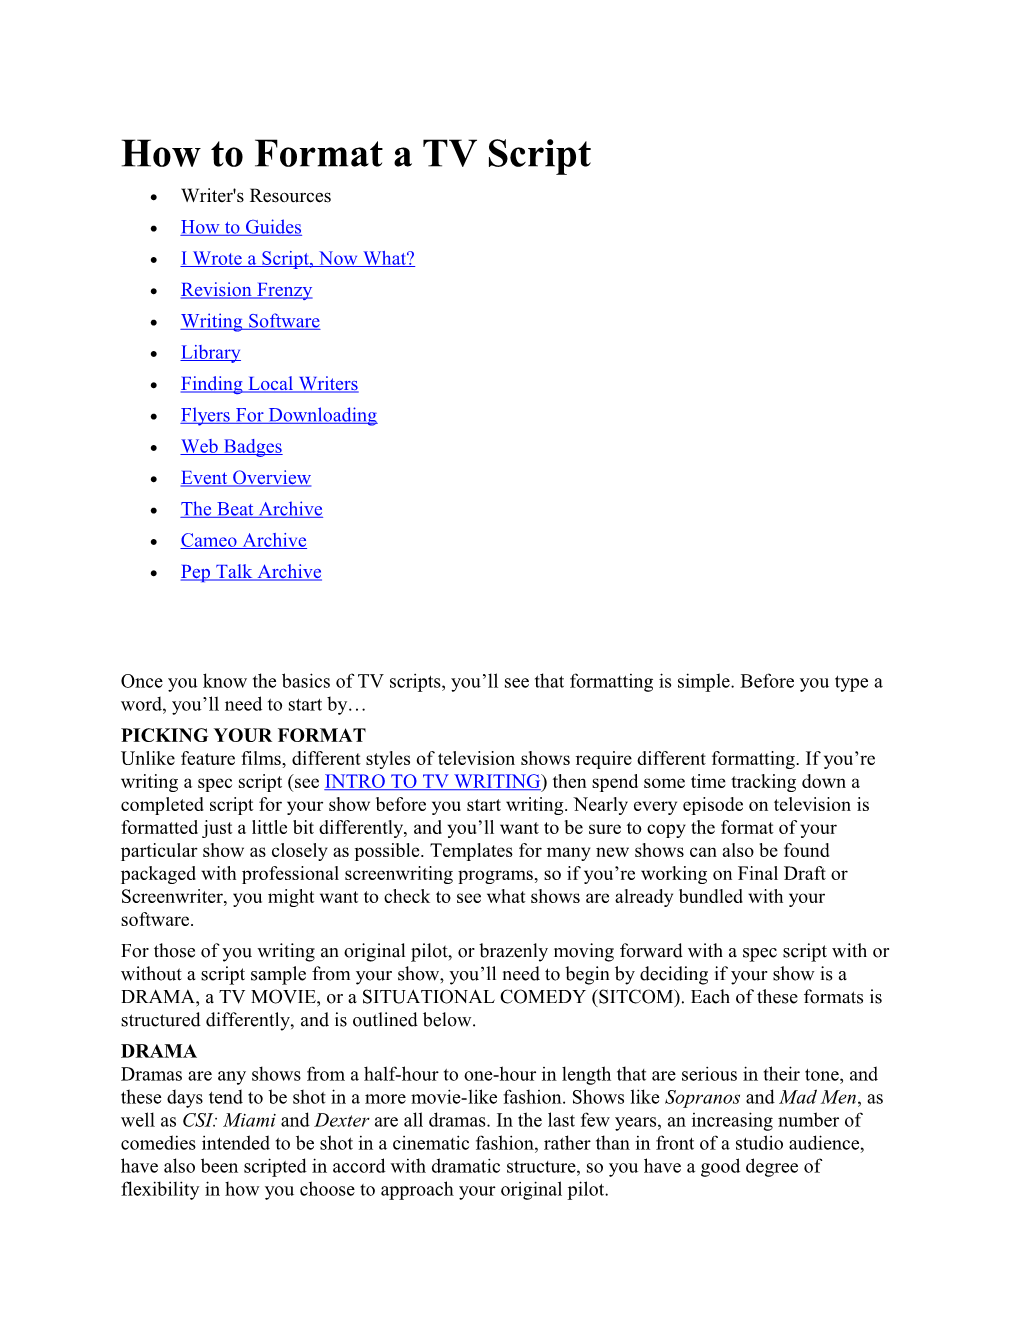 How to Format a TV Script